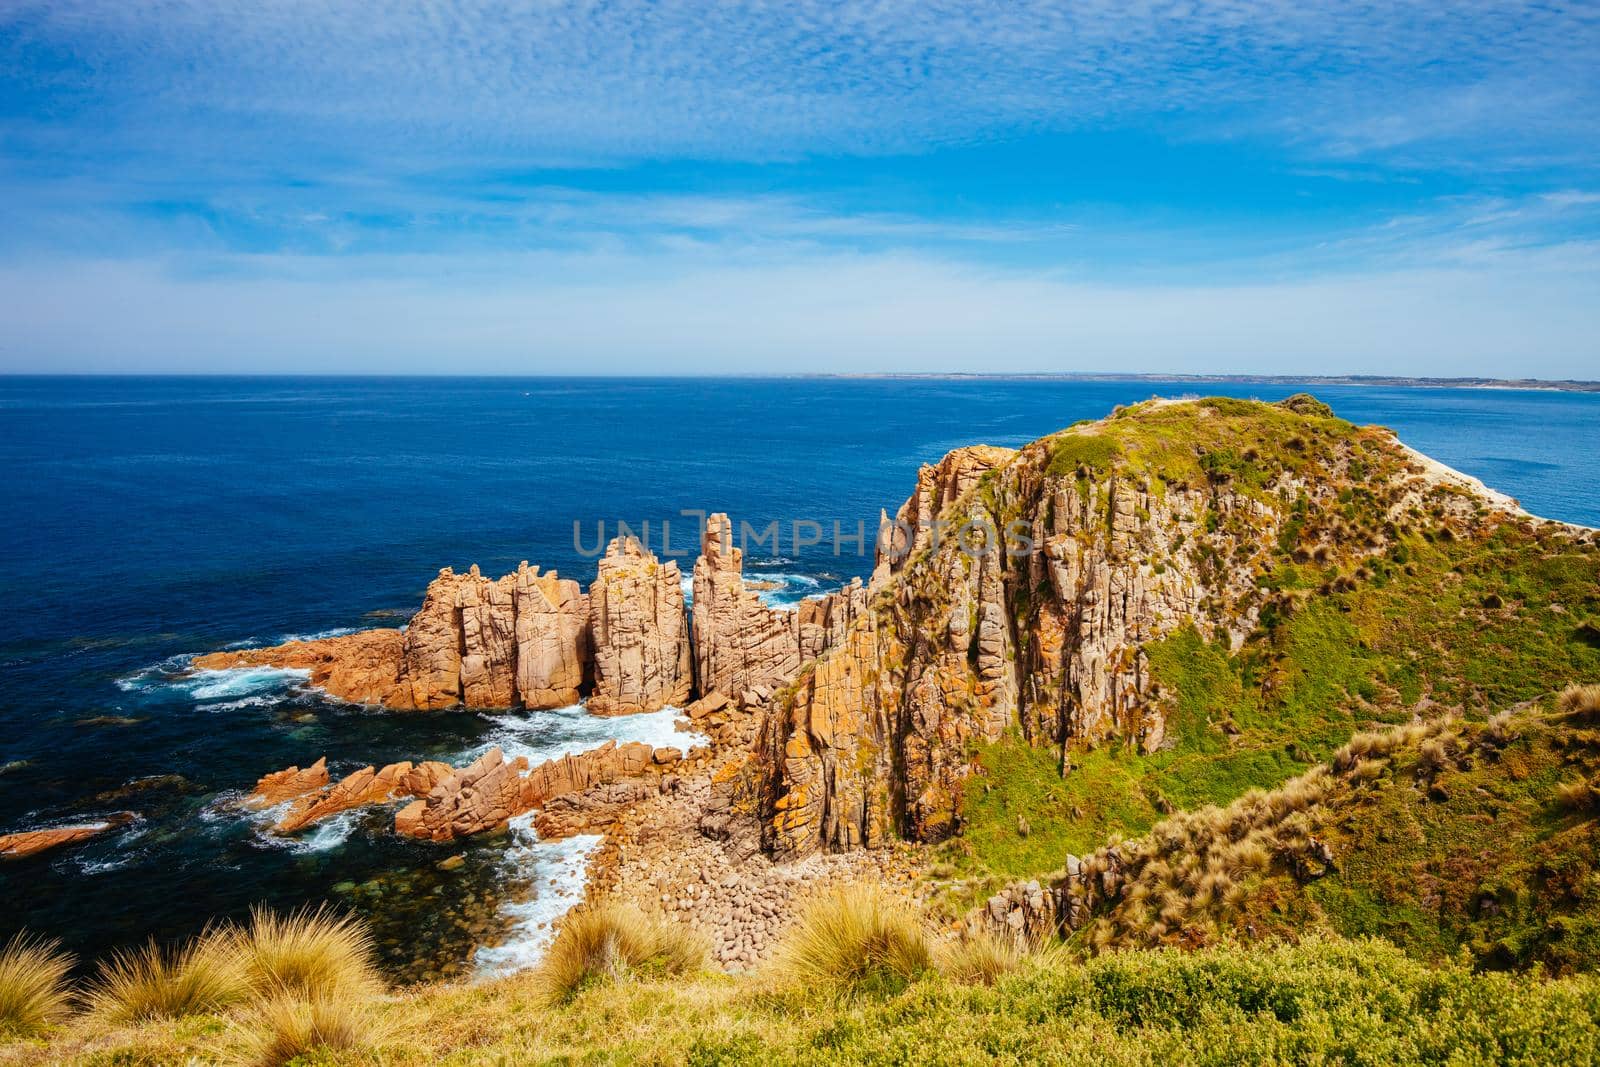 Pinnacles Lookout view of dramatic rock formations at Cape Woolamai on Phillip Island, Victoria, Australia